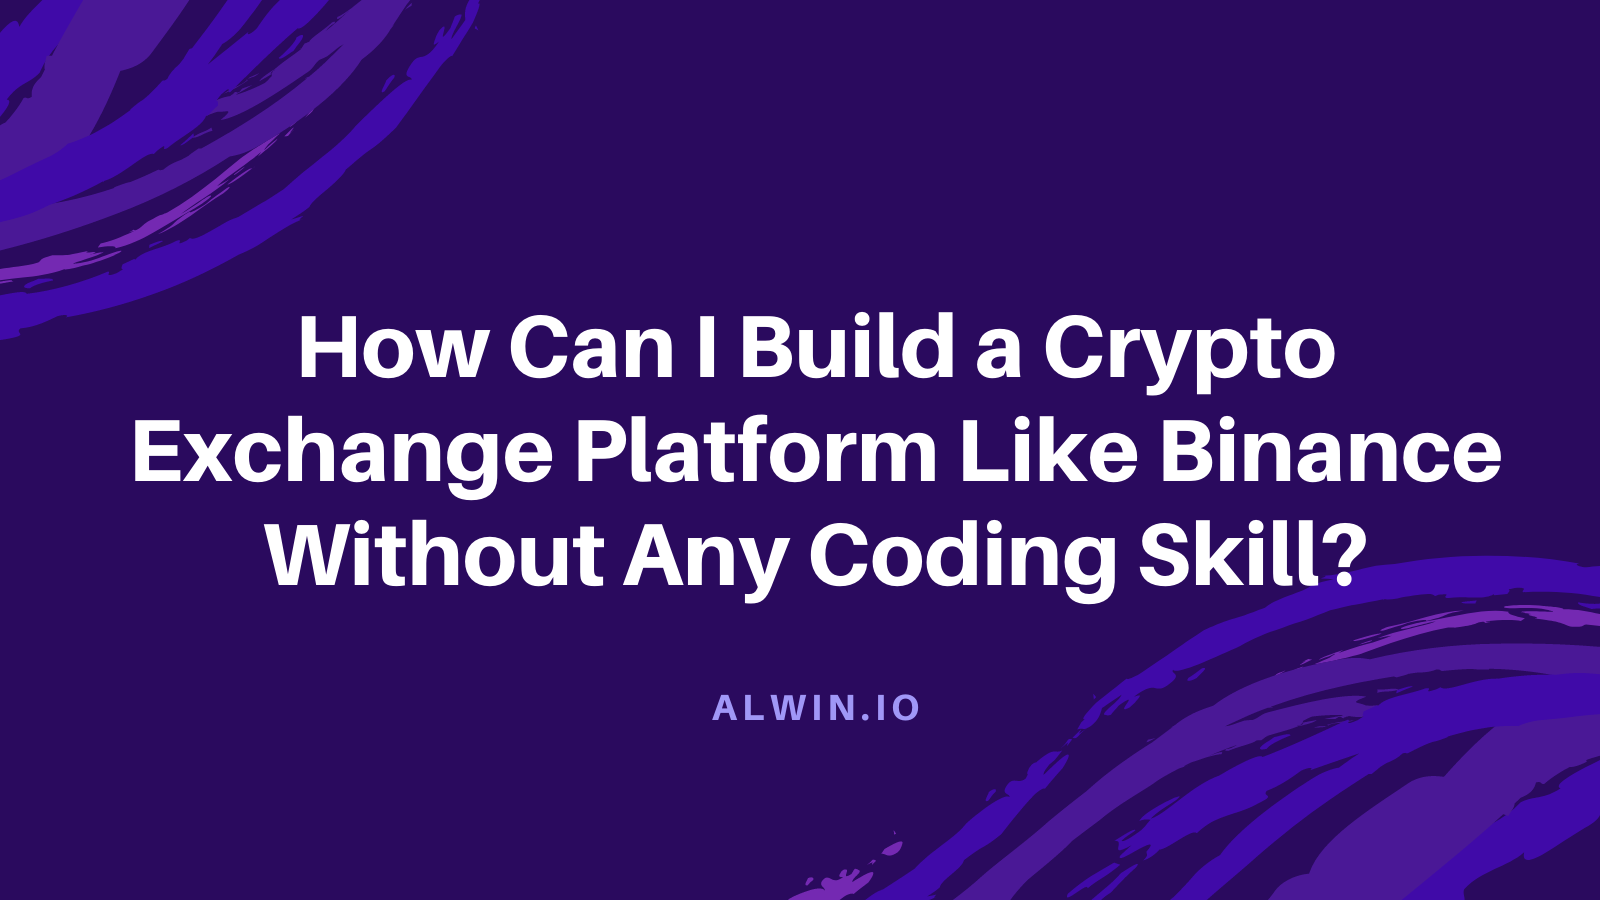 Article about How Can I Build a Crypto Exchange Platform Like Binance Without Any Coding Skills